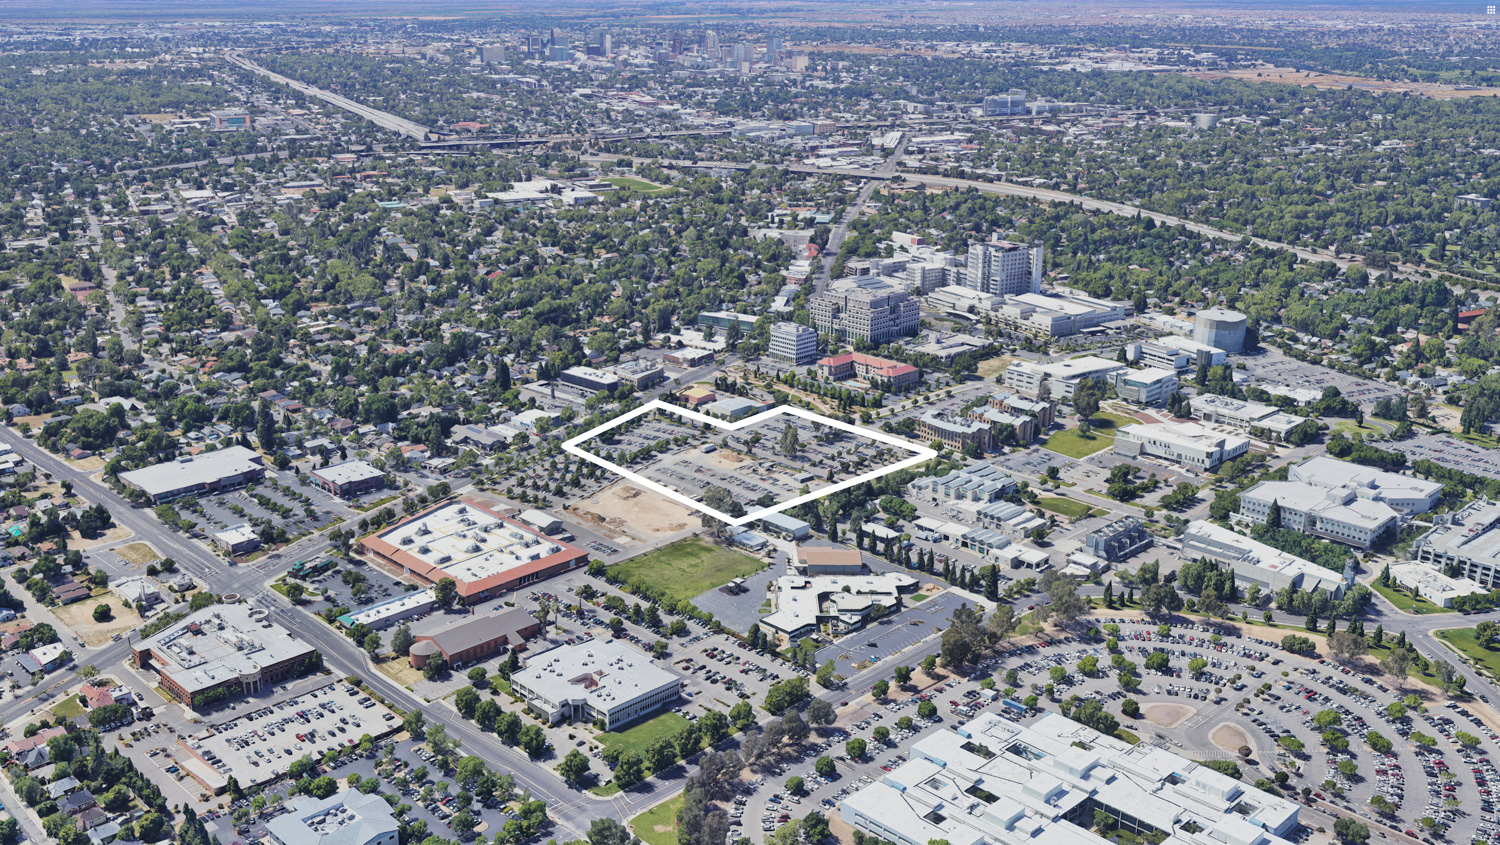 Aggie Square Phase 1 land in its current condition, image via Google Satellite with outline by SF YIMBY